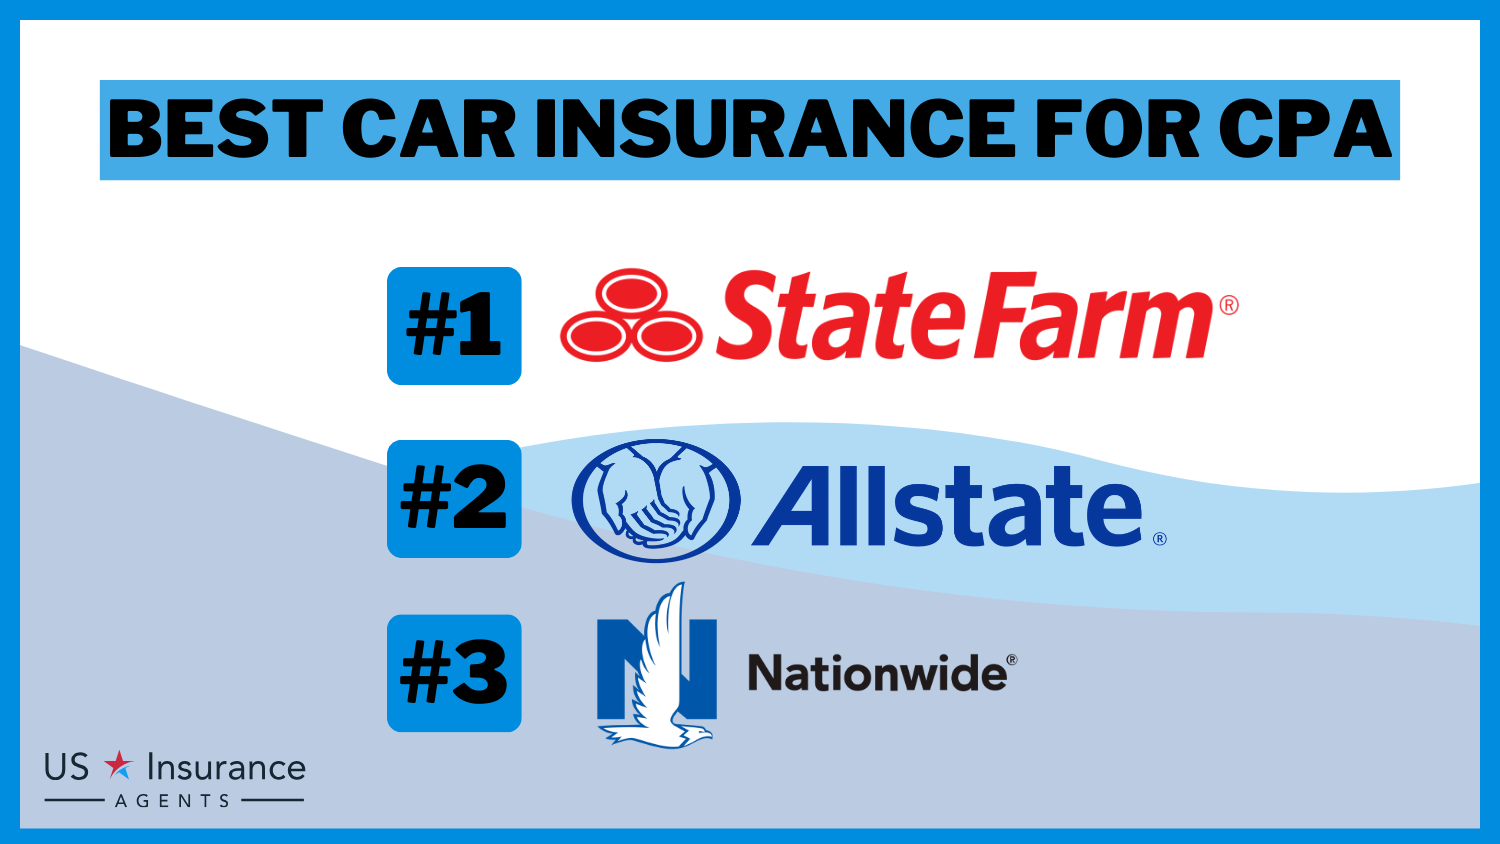 Best Car Insurance for CPA: State Farm, Allstate and Nationwide